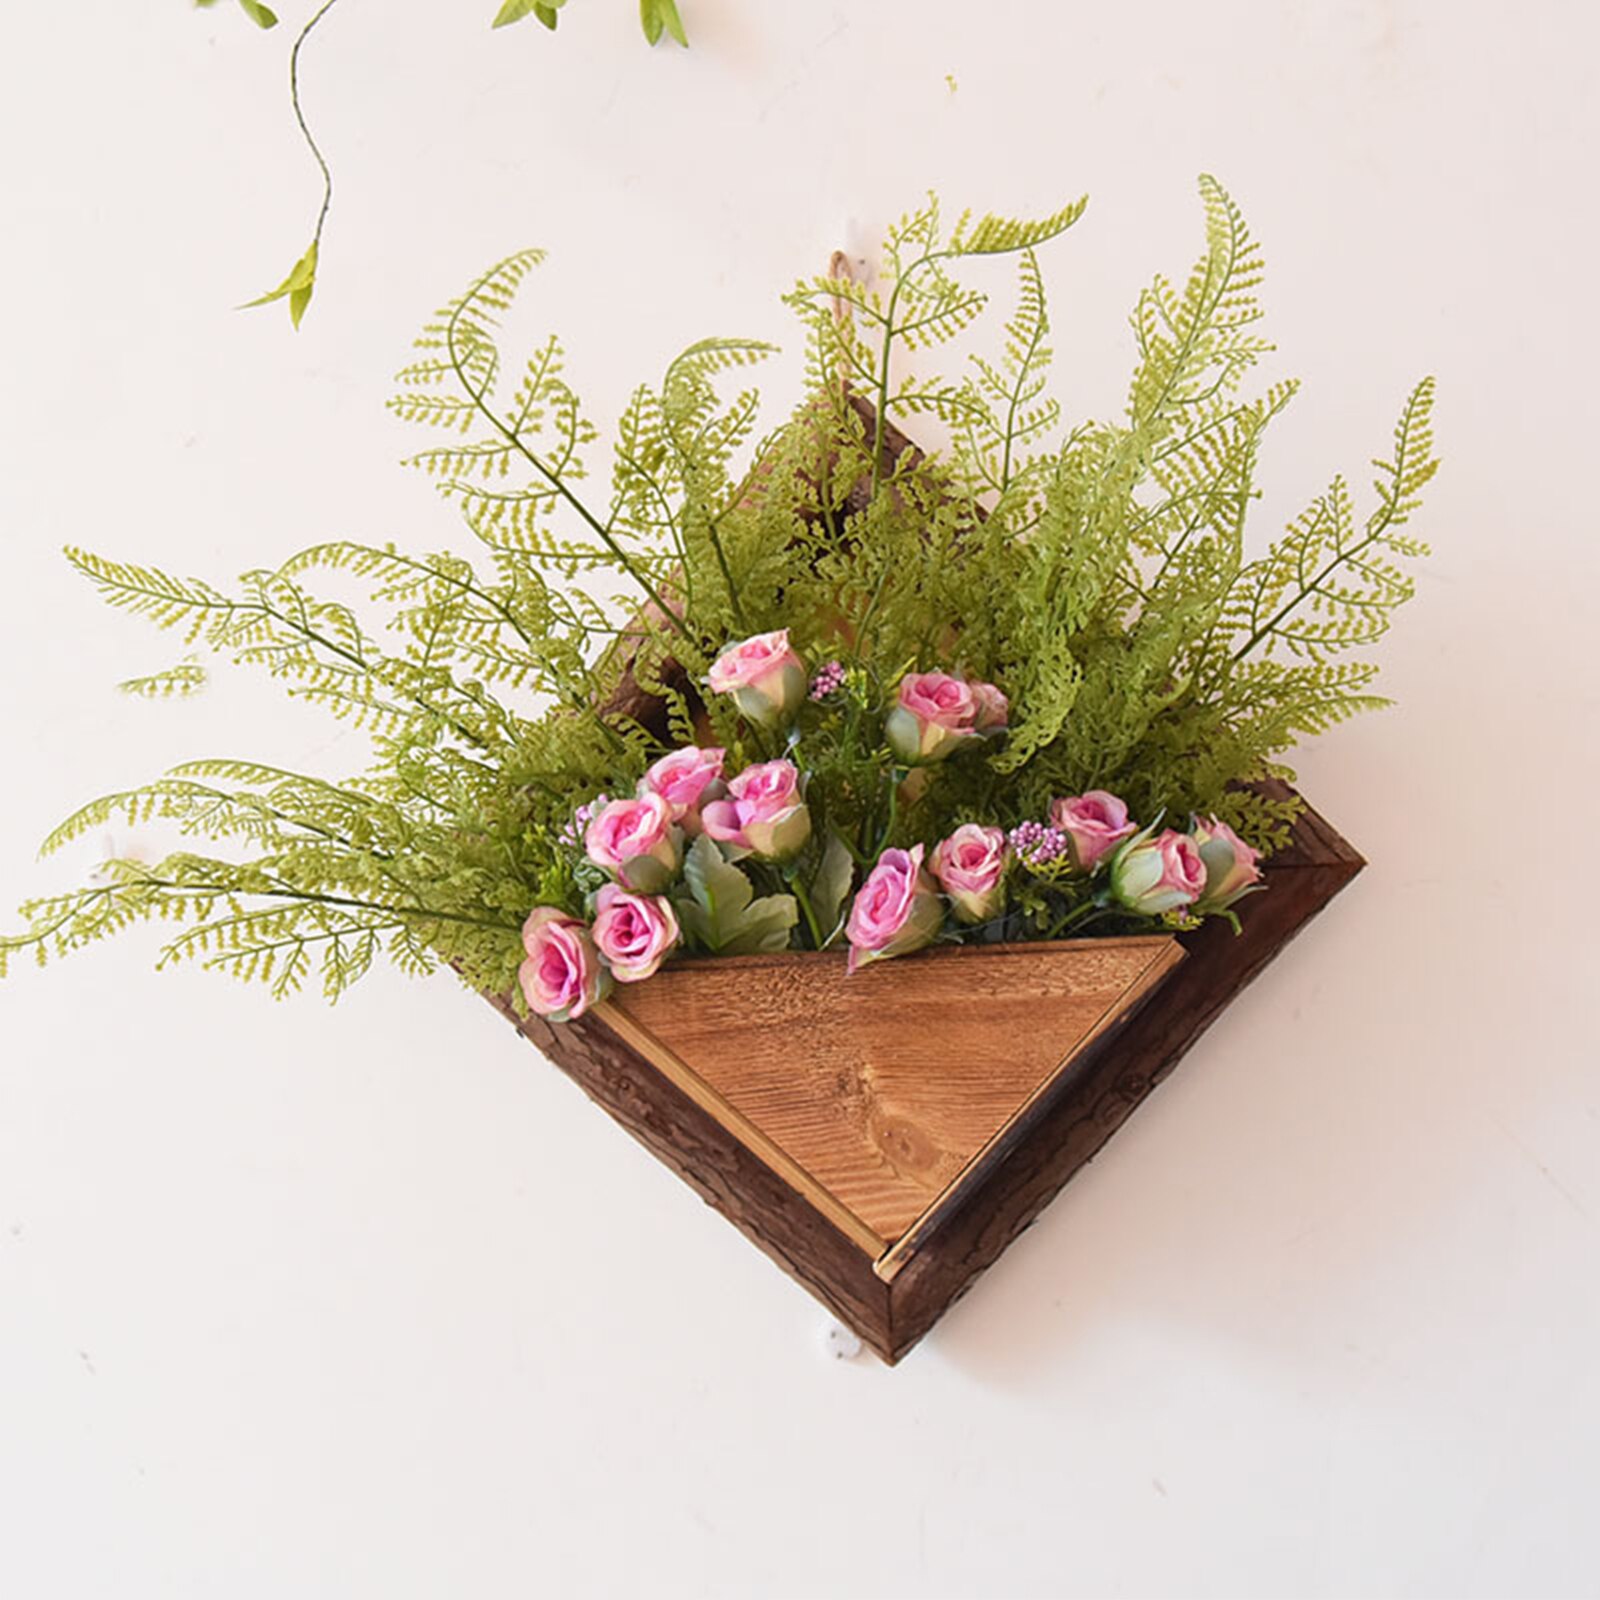 Retro Hanging Planter Nordic Style Flower Pot Wooden Plant Pendant Wall Flowerpot Living Mounted Container Holder Dining Room